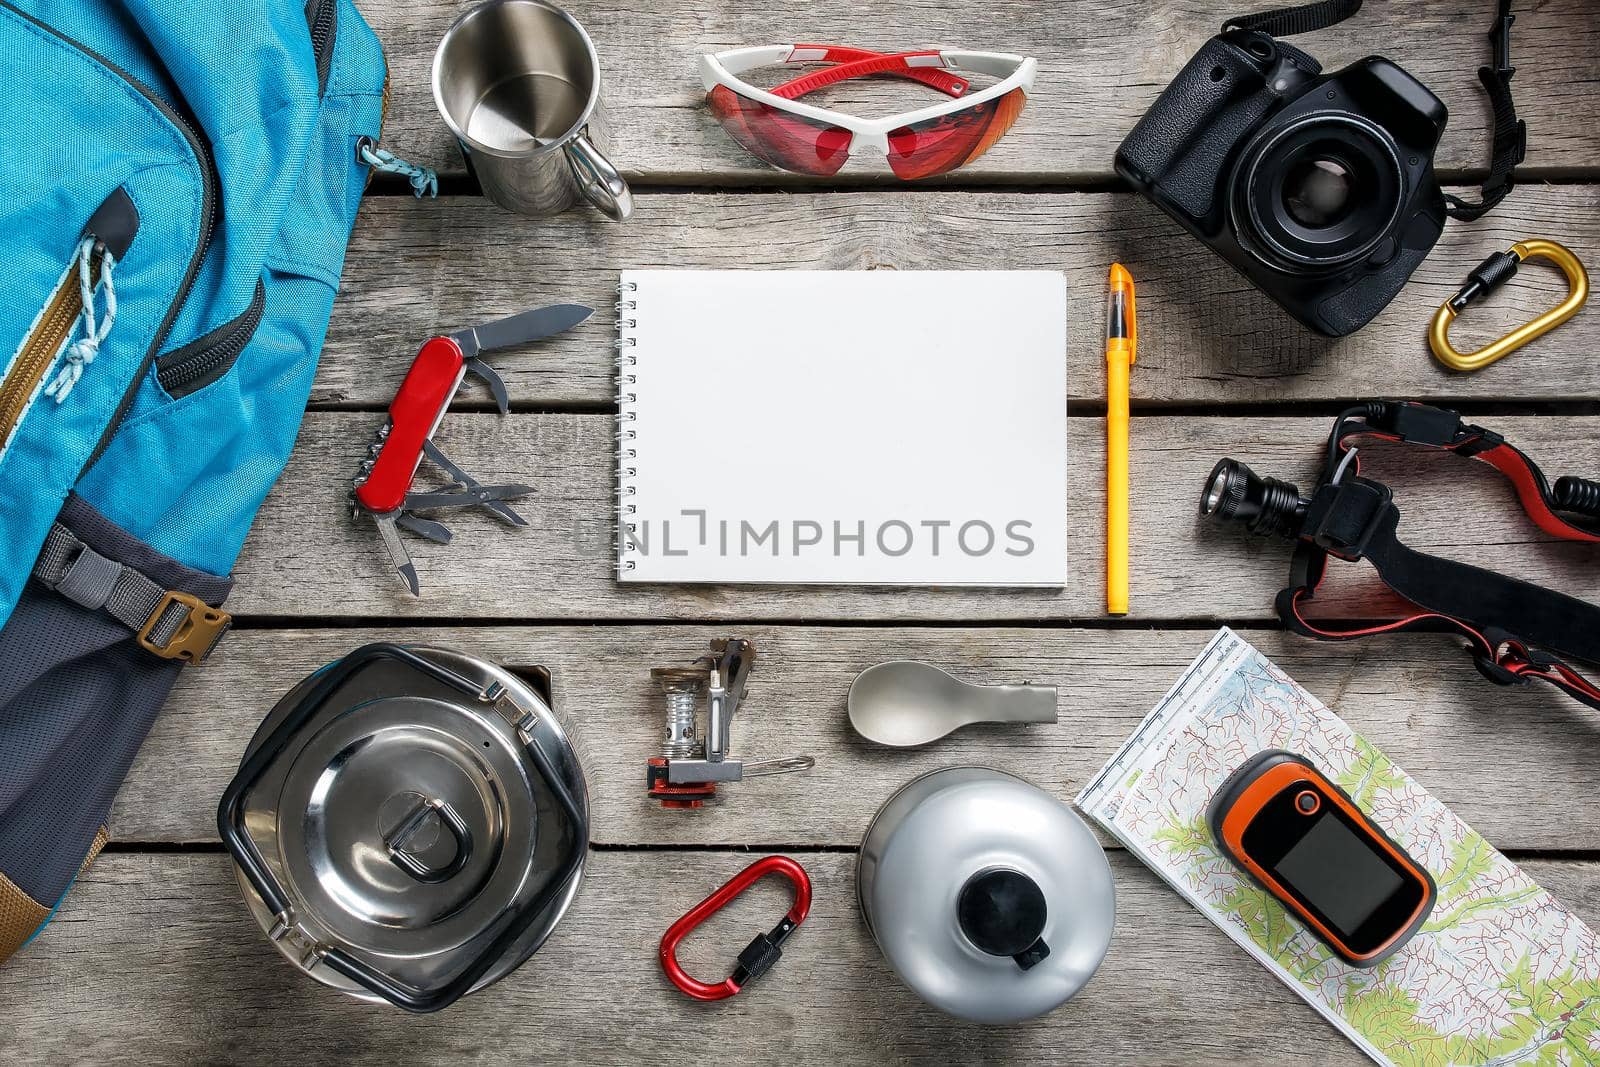 Top view of tourist equipment for travel and tourism on a rustic light wooden floor with an empty space in the middle. Items include a kettle, a card, a knife, a rope, a carbine, a flashlight, shoes, GPS, a gas bottle, a burner, a spoon, a mug, a camera, glasses, a backpack.